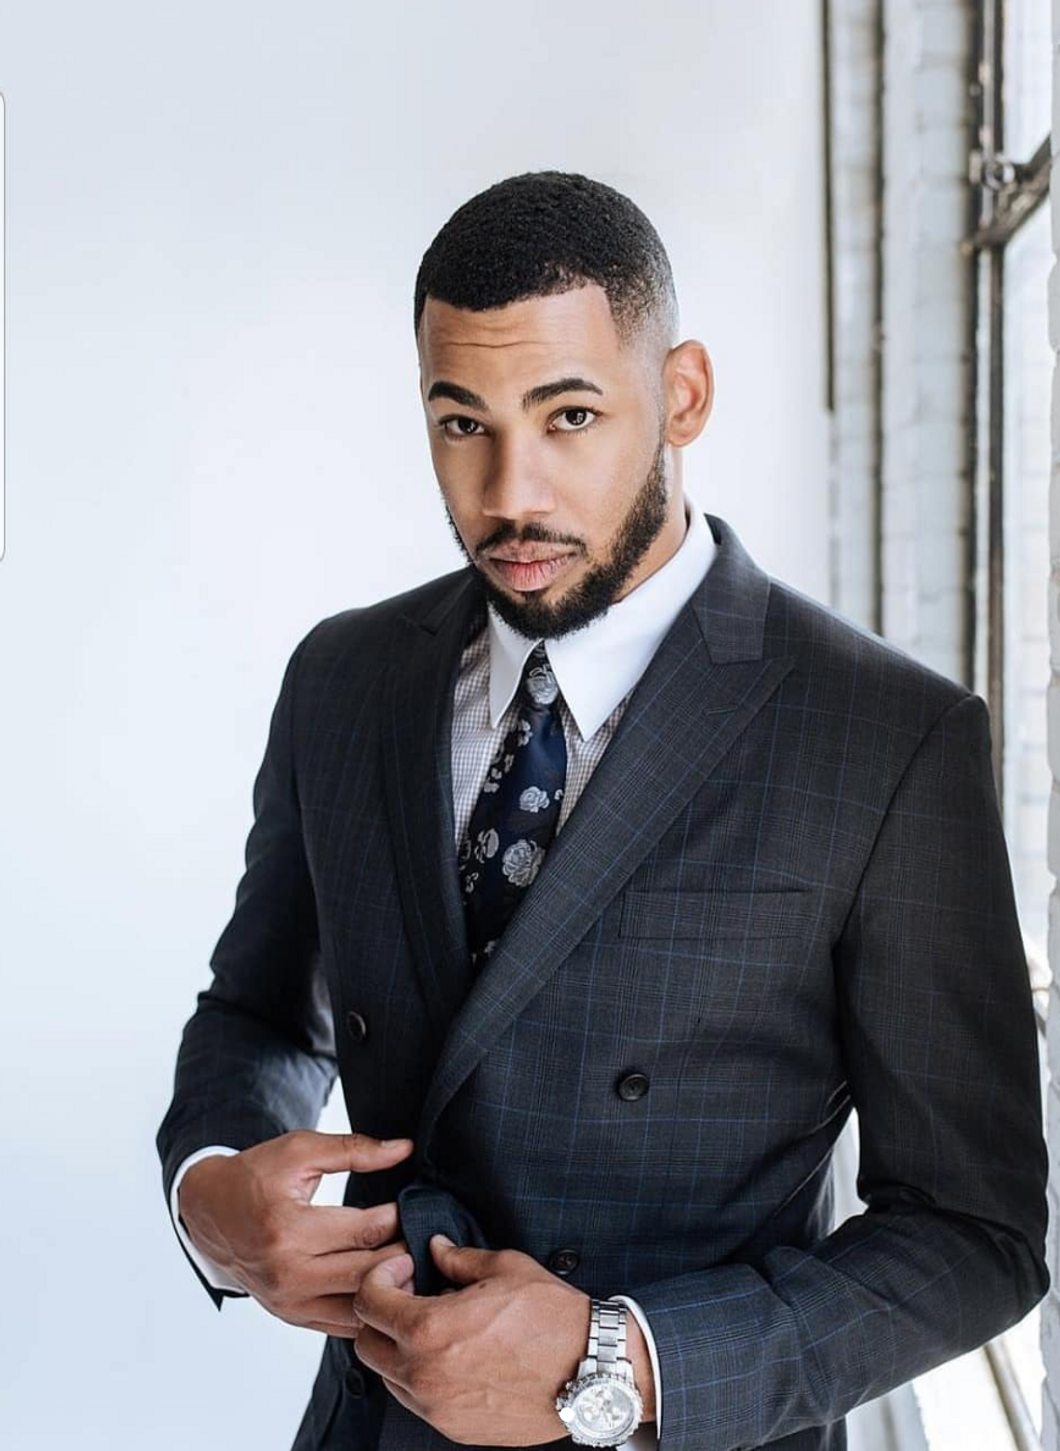 Bachelor Nation Needs Its First Black Male Lead, And Mike Johnson Is The Perfect Man For It